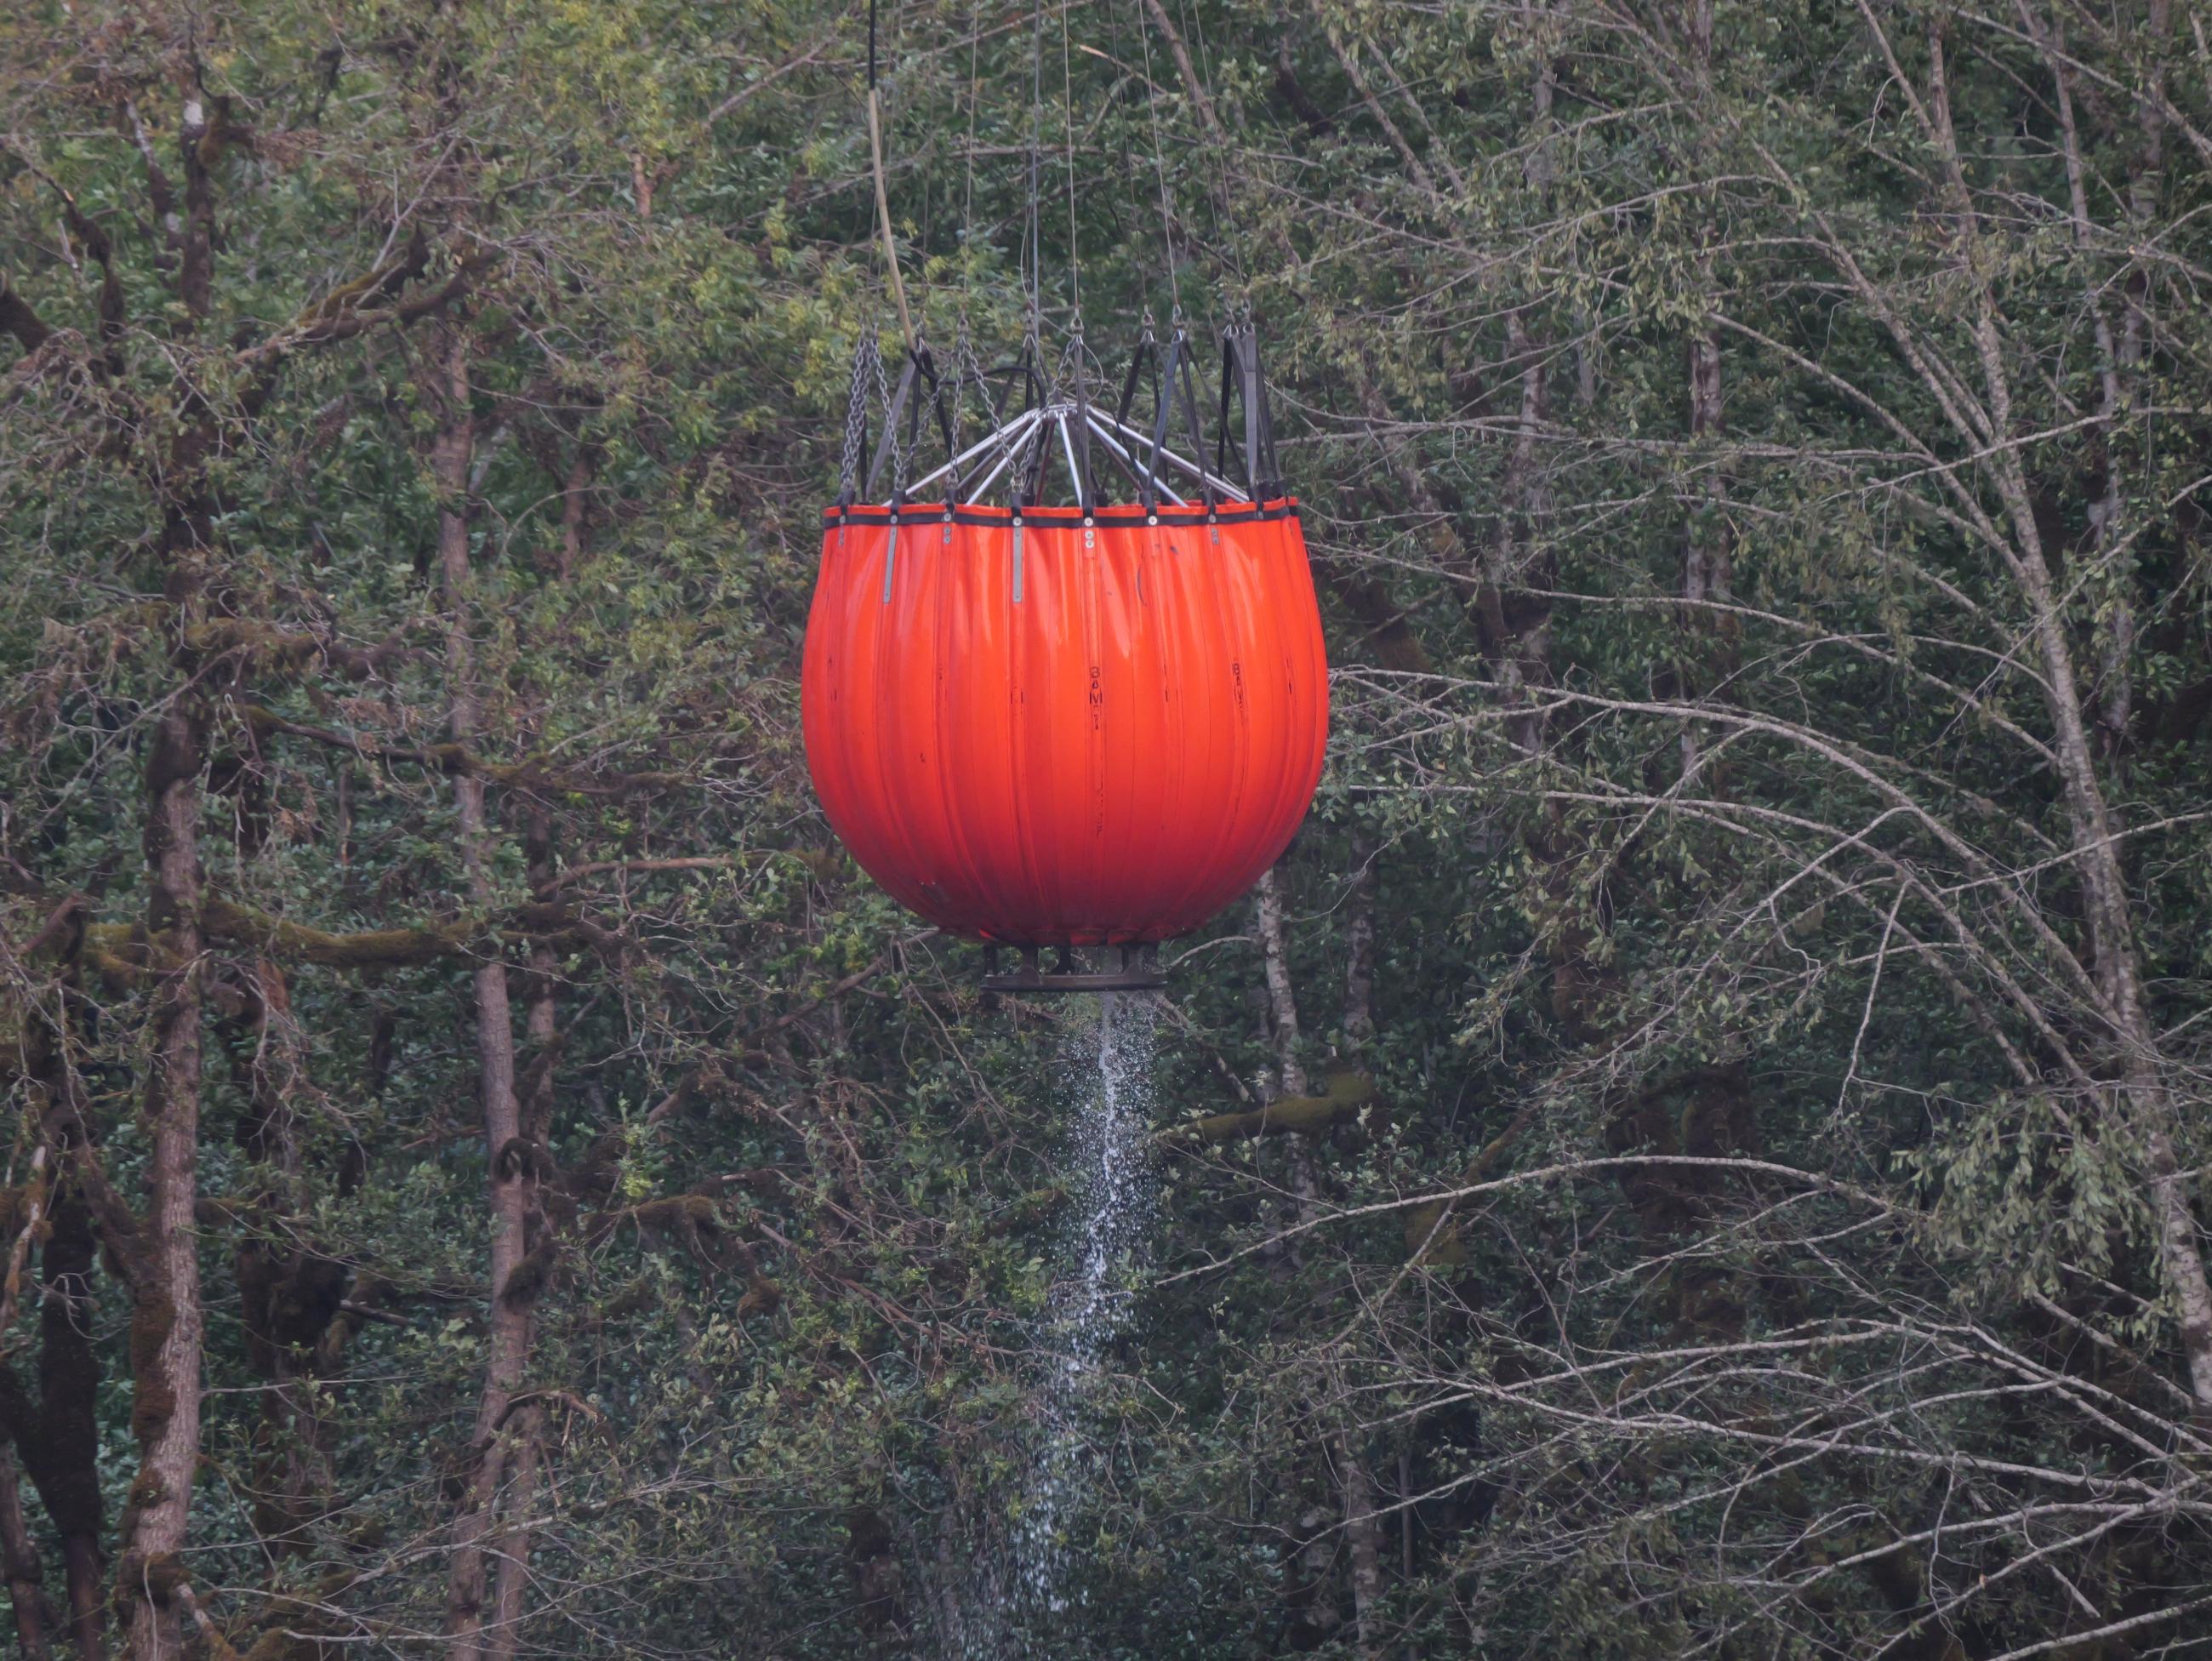 A "bambi" bucket drips water as it is lifted by a helicopter.